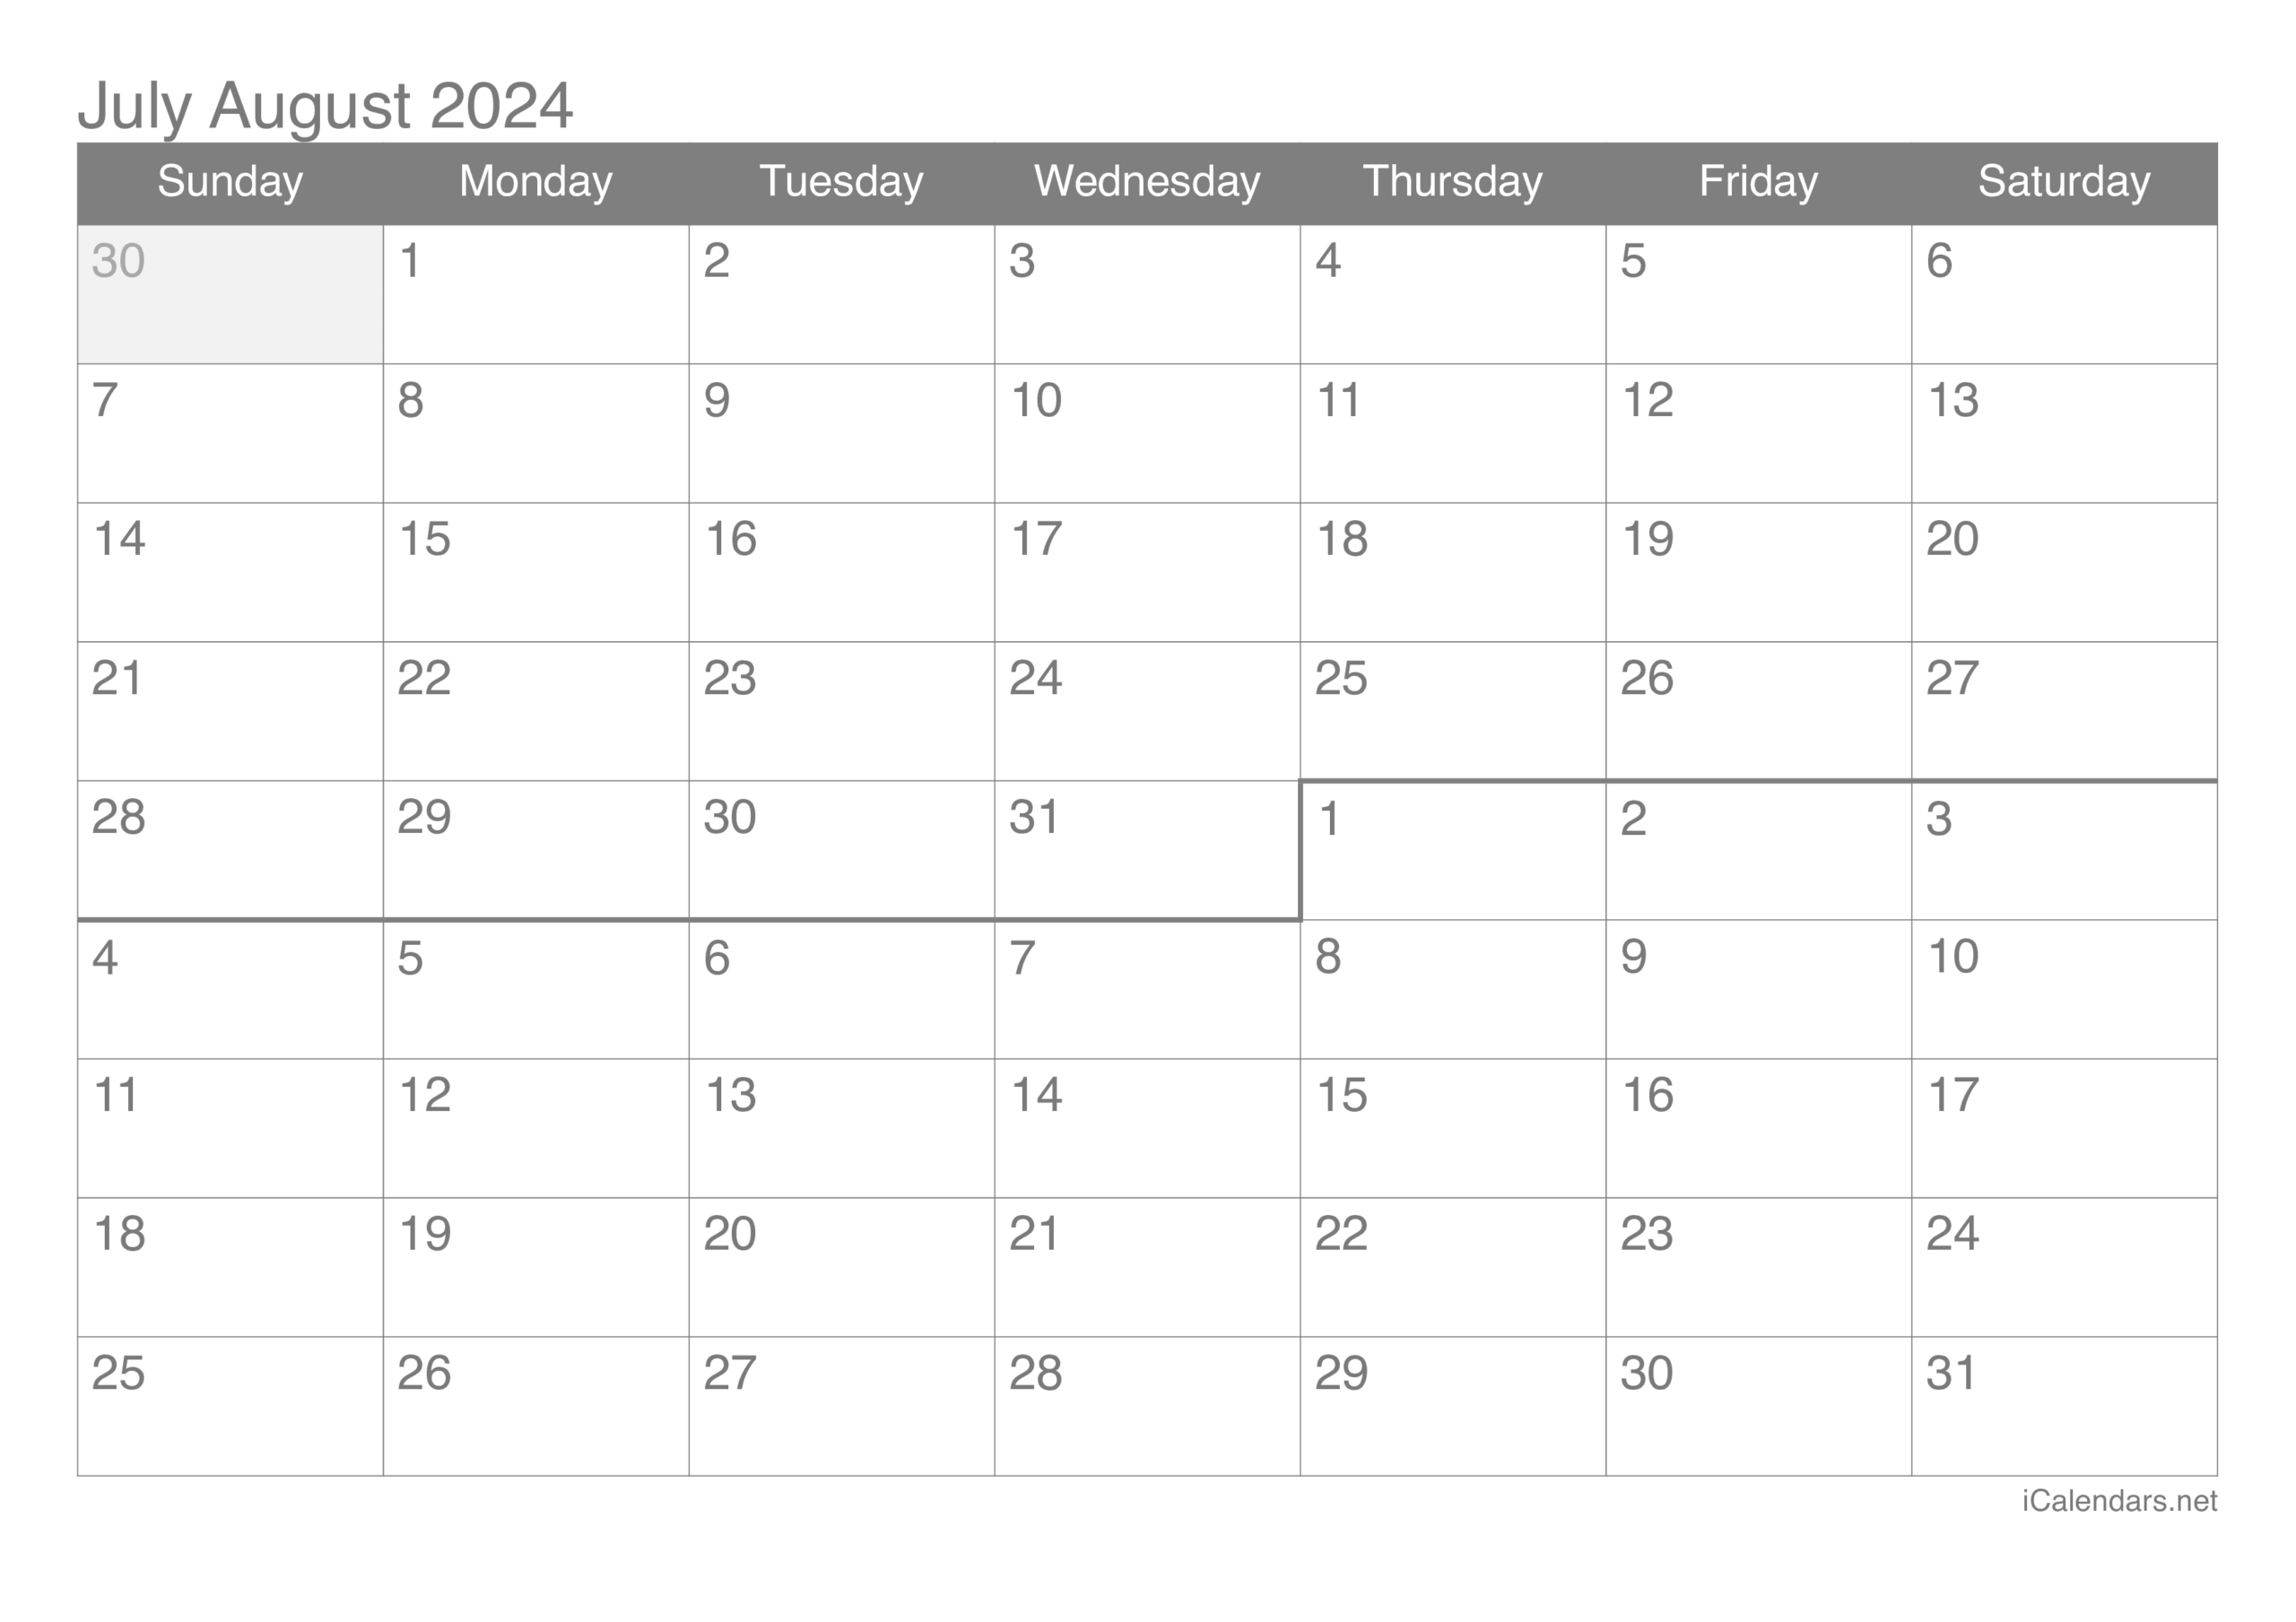 July And August 2024 Printable Calendar intended for Blank Calendar July and August 2024